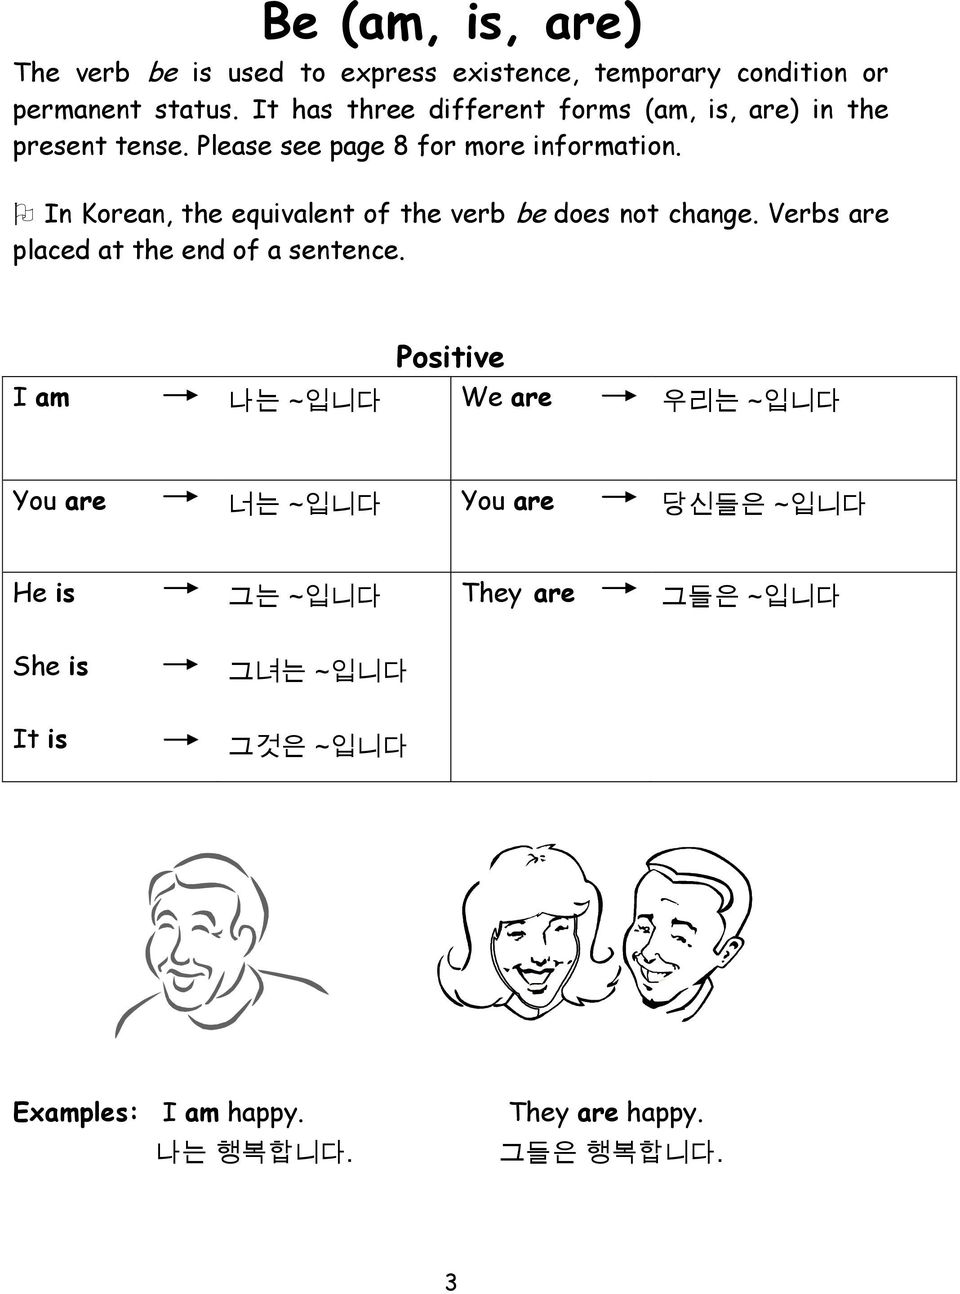 In Korean, the equivalent of the verb be does not change. Verbs are placed at the end of a sentence.